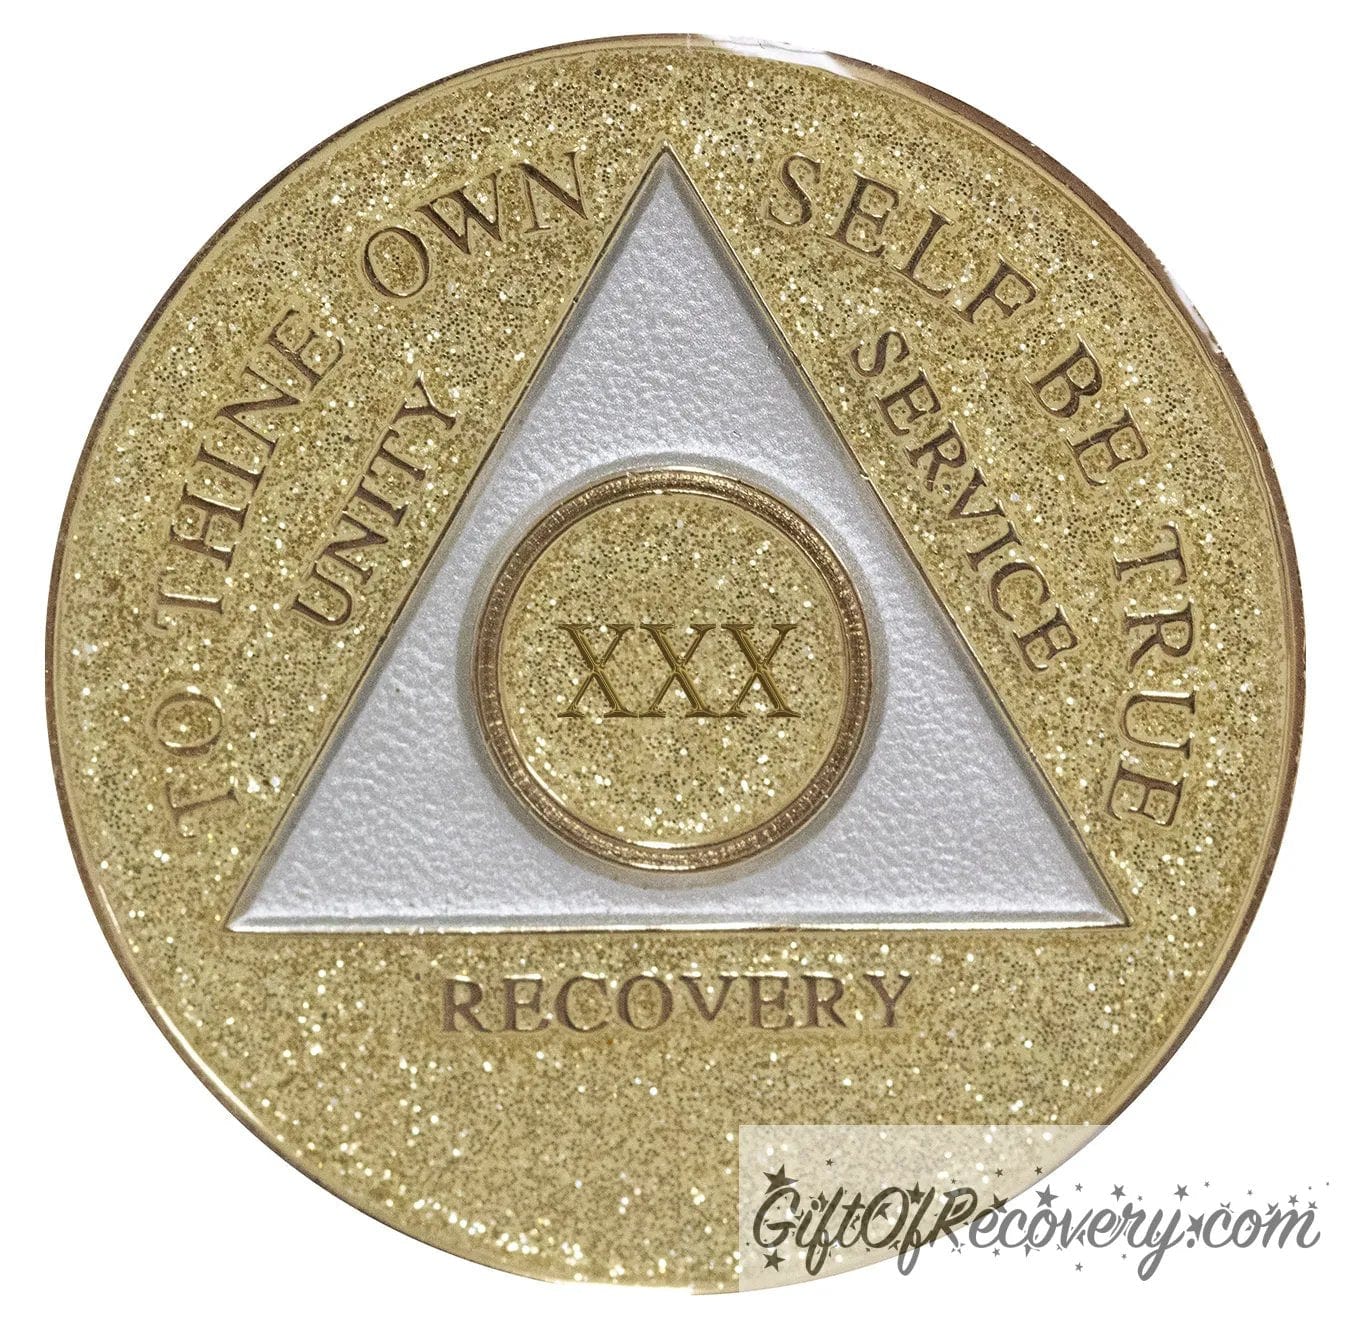 30 year AA medallion Gold glitter, with the triangle pearl white and to thine own self be true, unity, service, recovery, and the roman numeral embossed with 14k gold-plated brass, the recovery medallion is sealed with resin for a shiny finish that will last and is scratch proof.